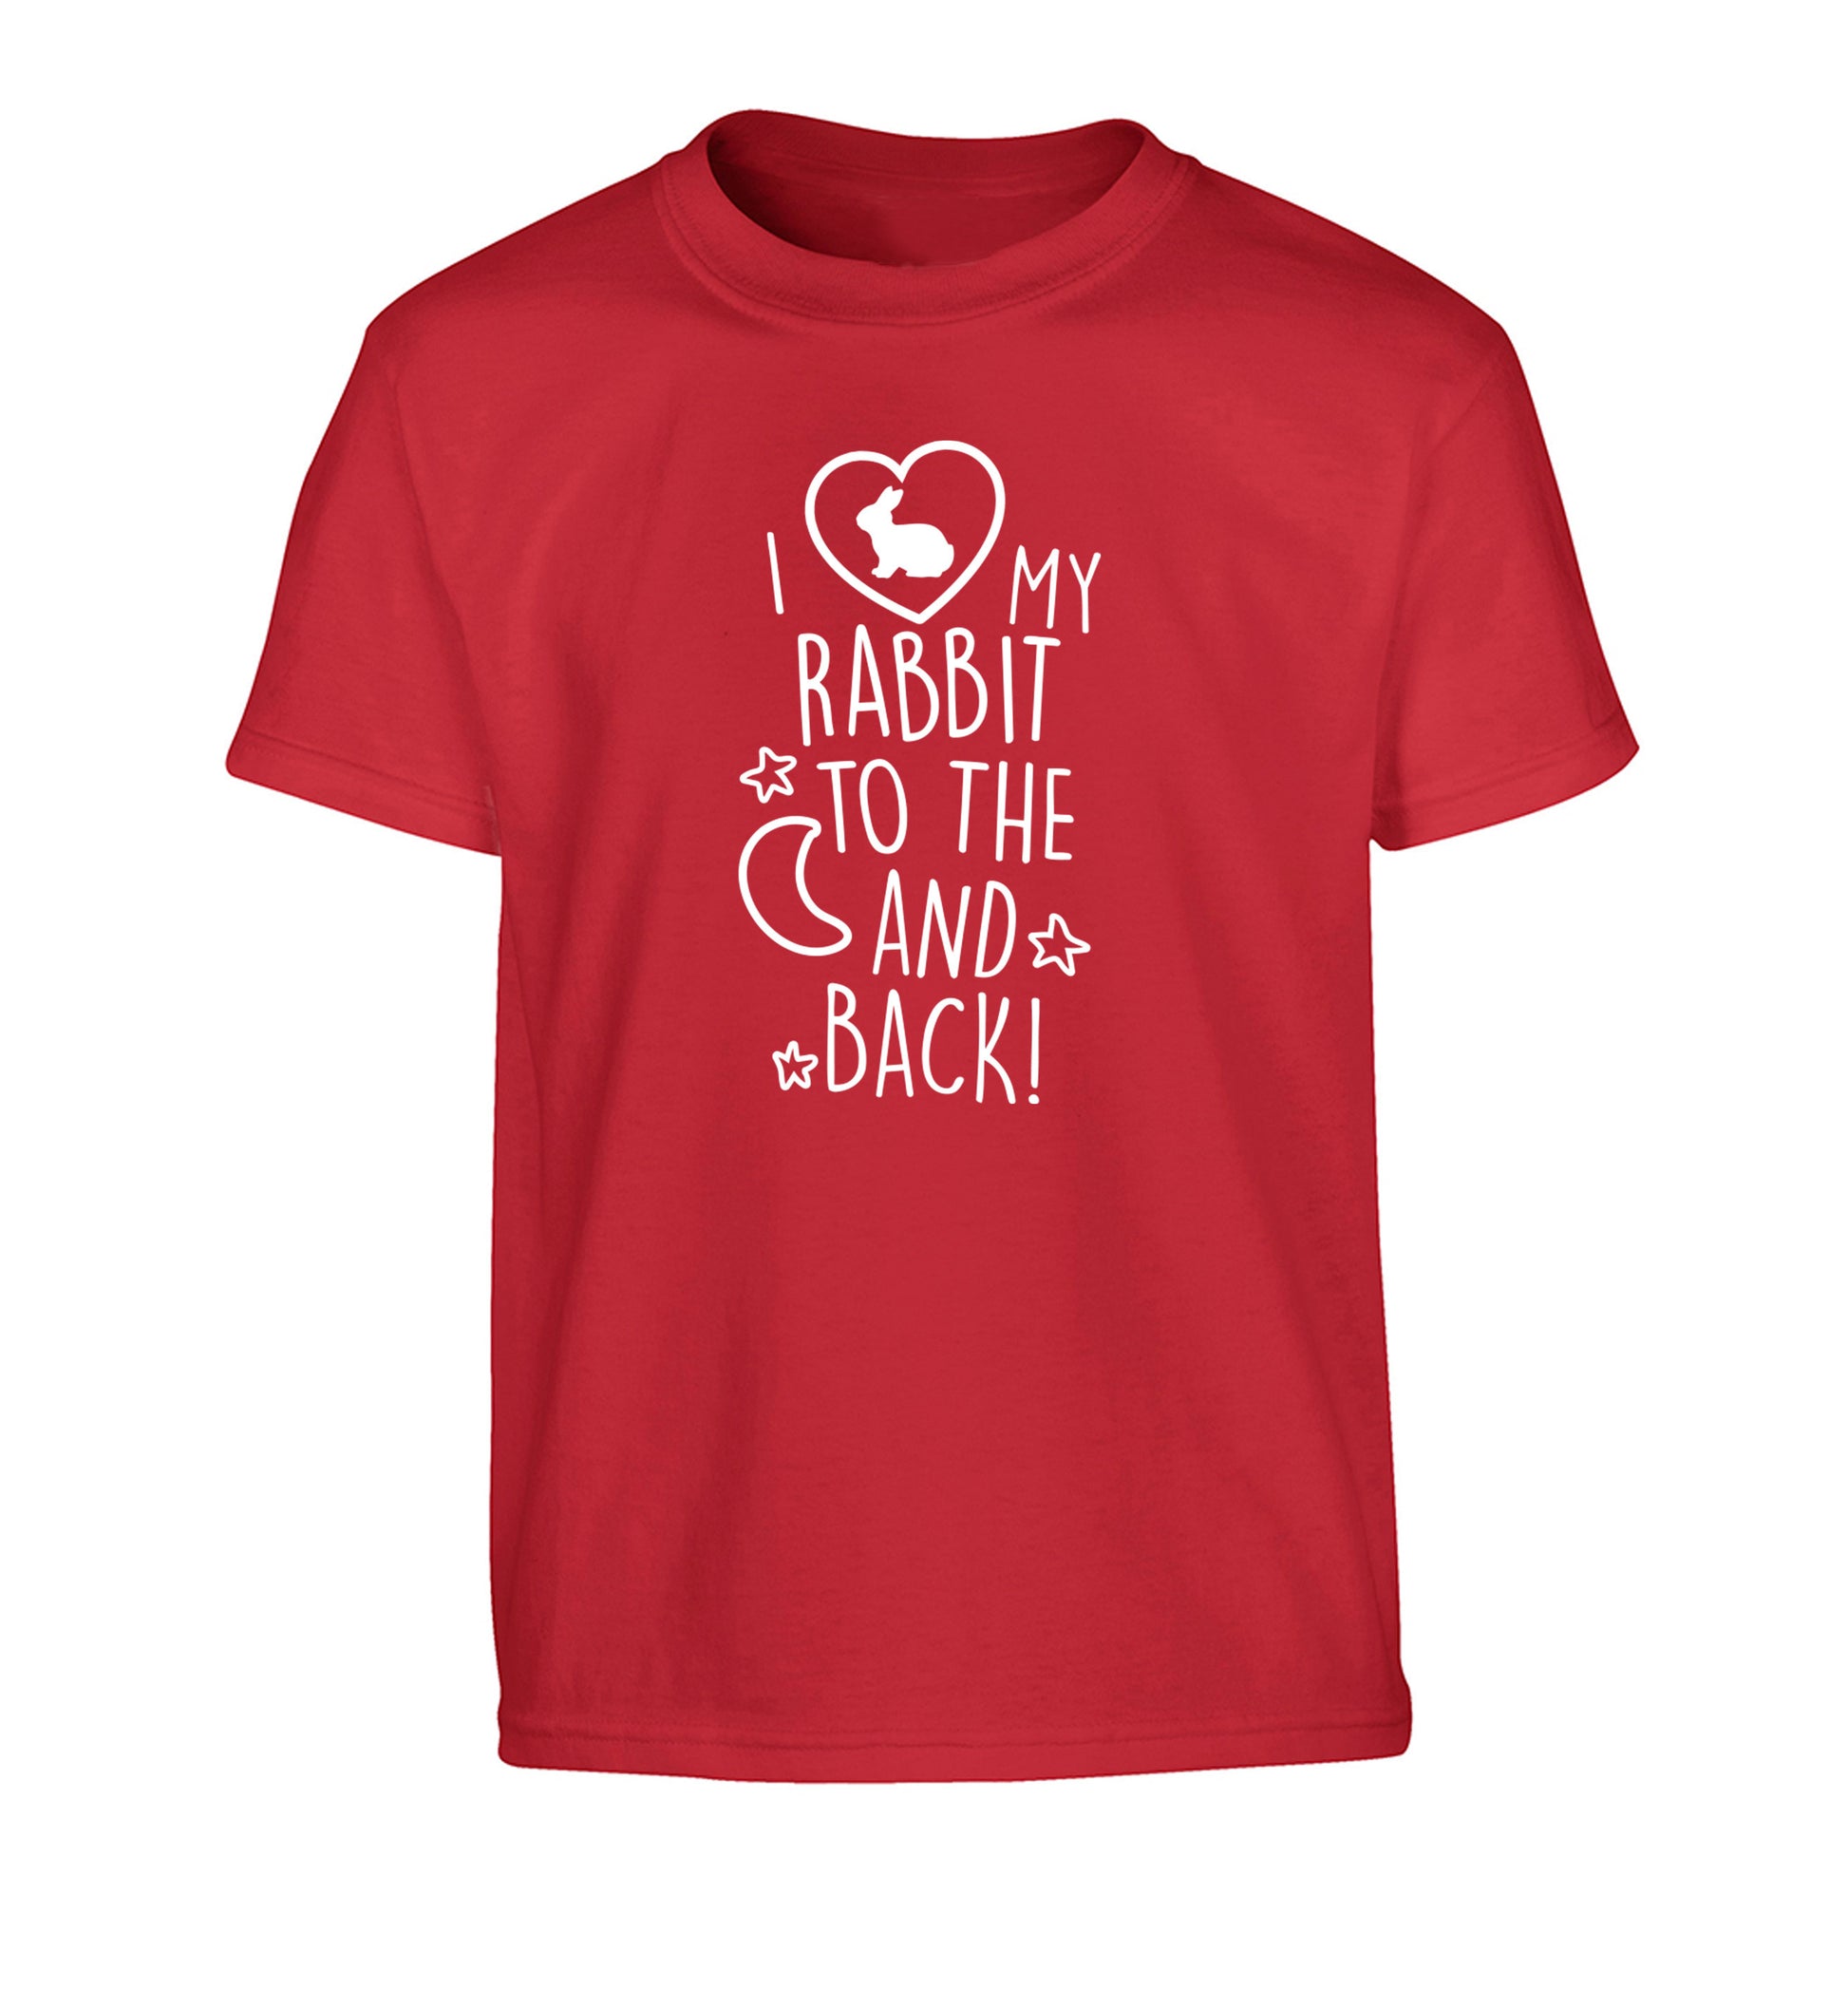 I love my rabbit to the moon and back Children's red Tshirt 12-14 Years